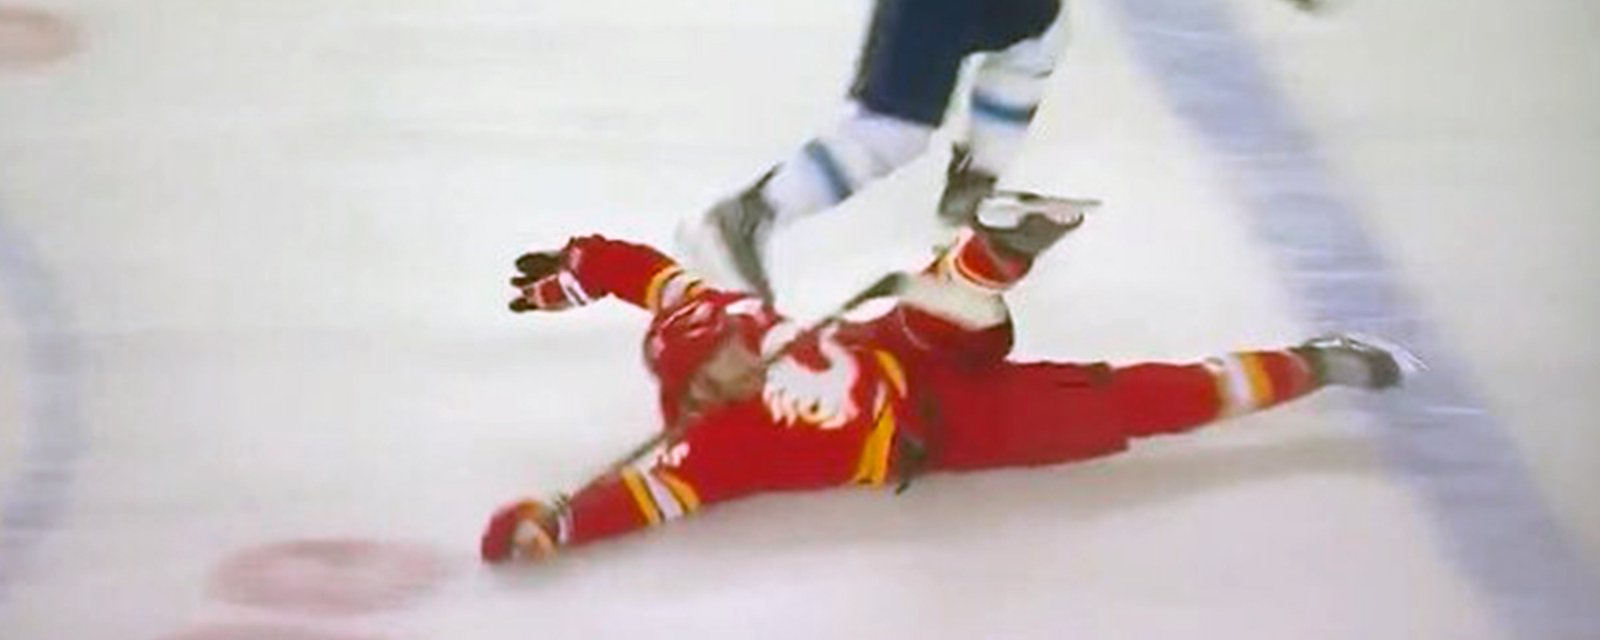 Tkachuk absolutely embarrasses himself with a ridiculous, over the top dive